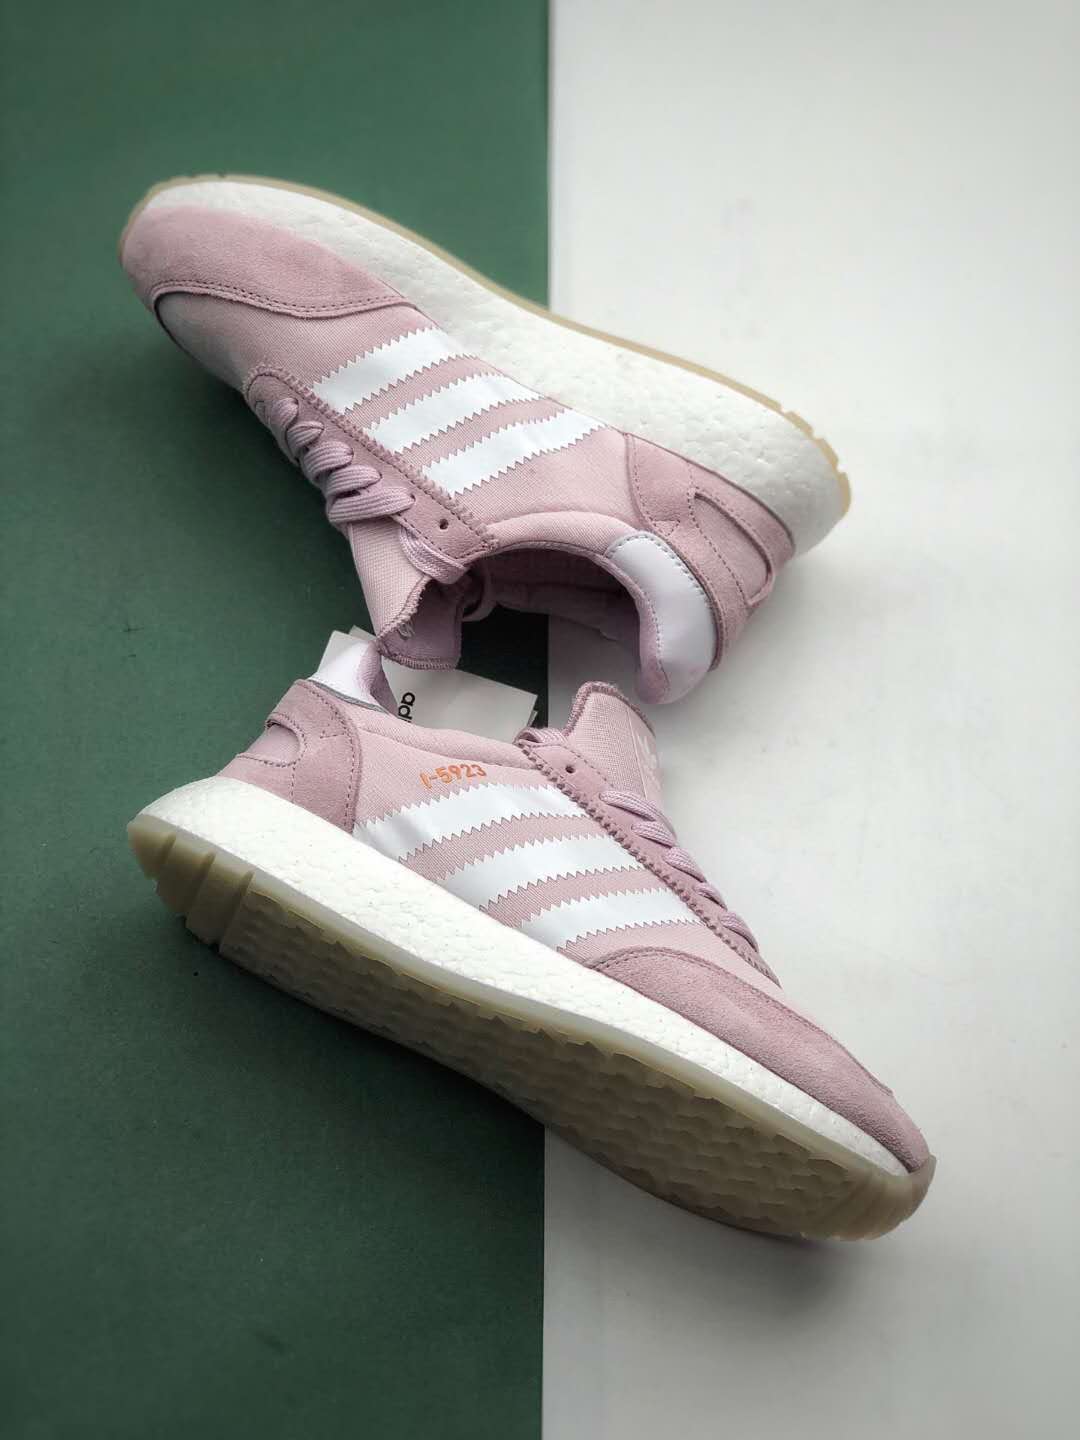 Adidas I-5923 Pink DA8789 - Stylish and Comfortable Women's Sneakers